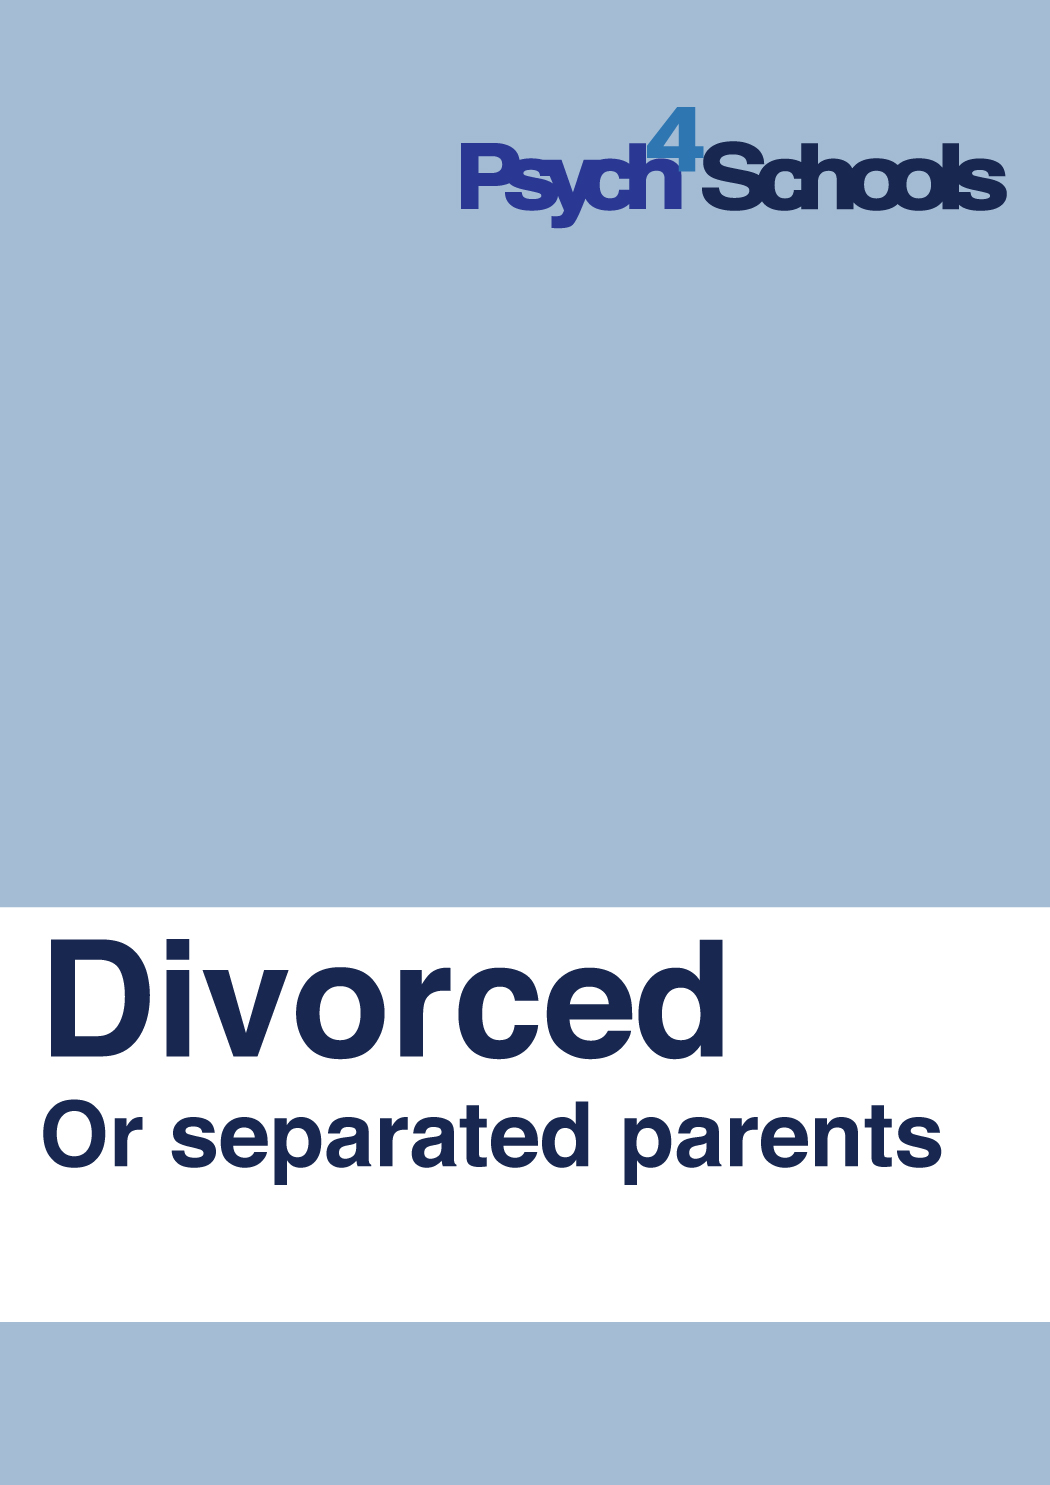 Divorced or separated parents